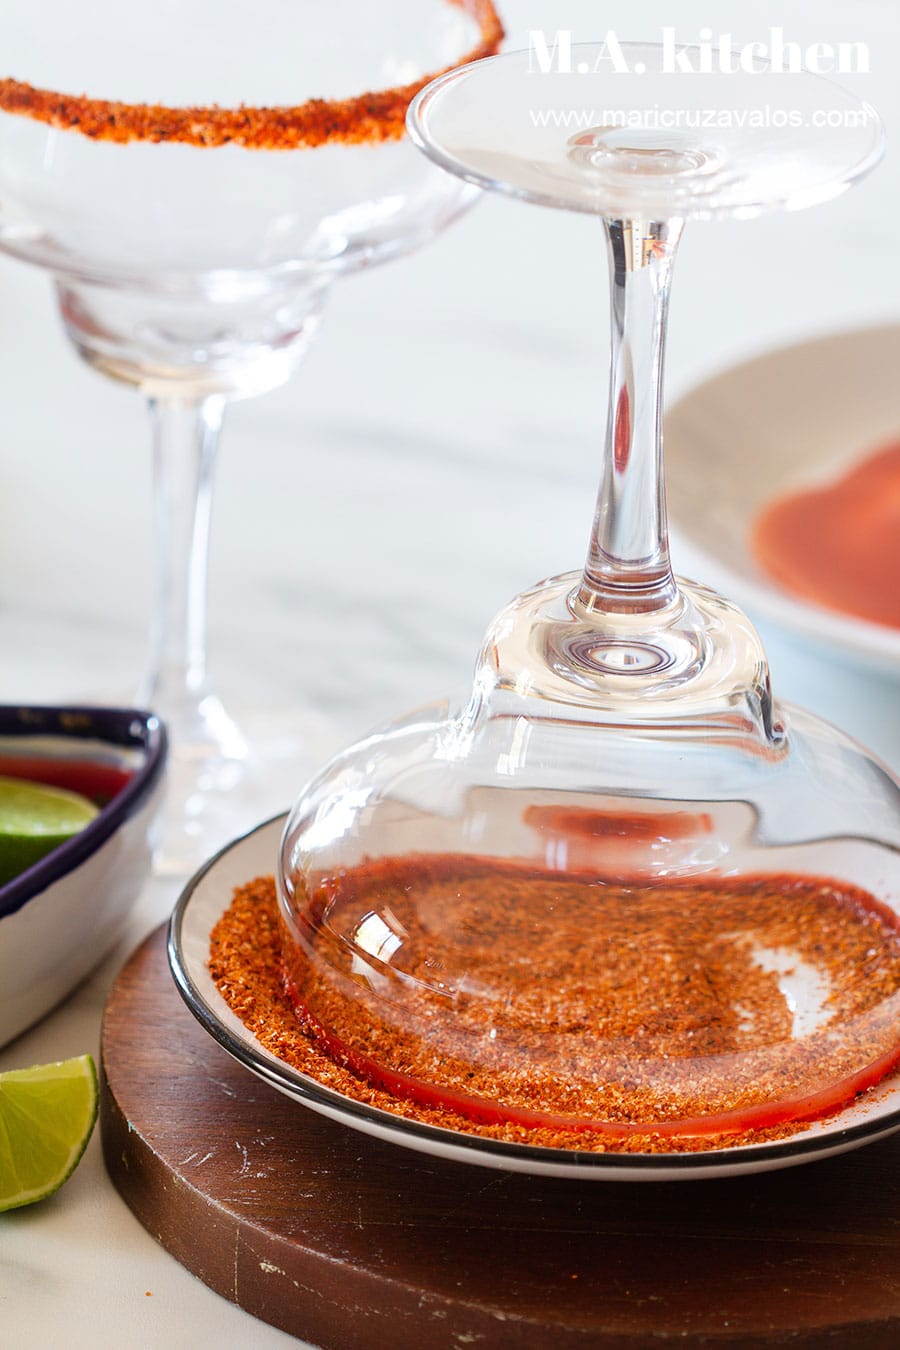 Dipping rims of a margarita glass on chili powder.